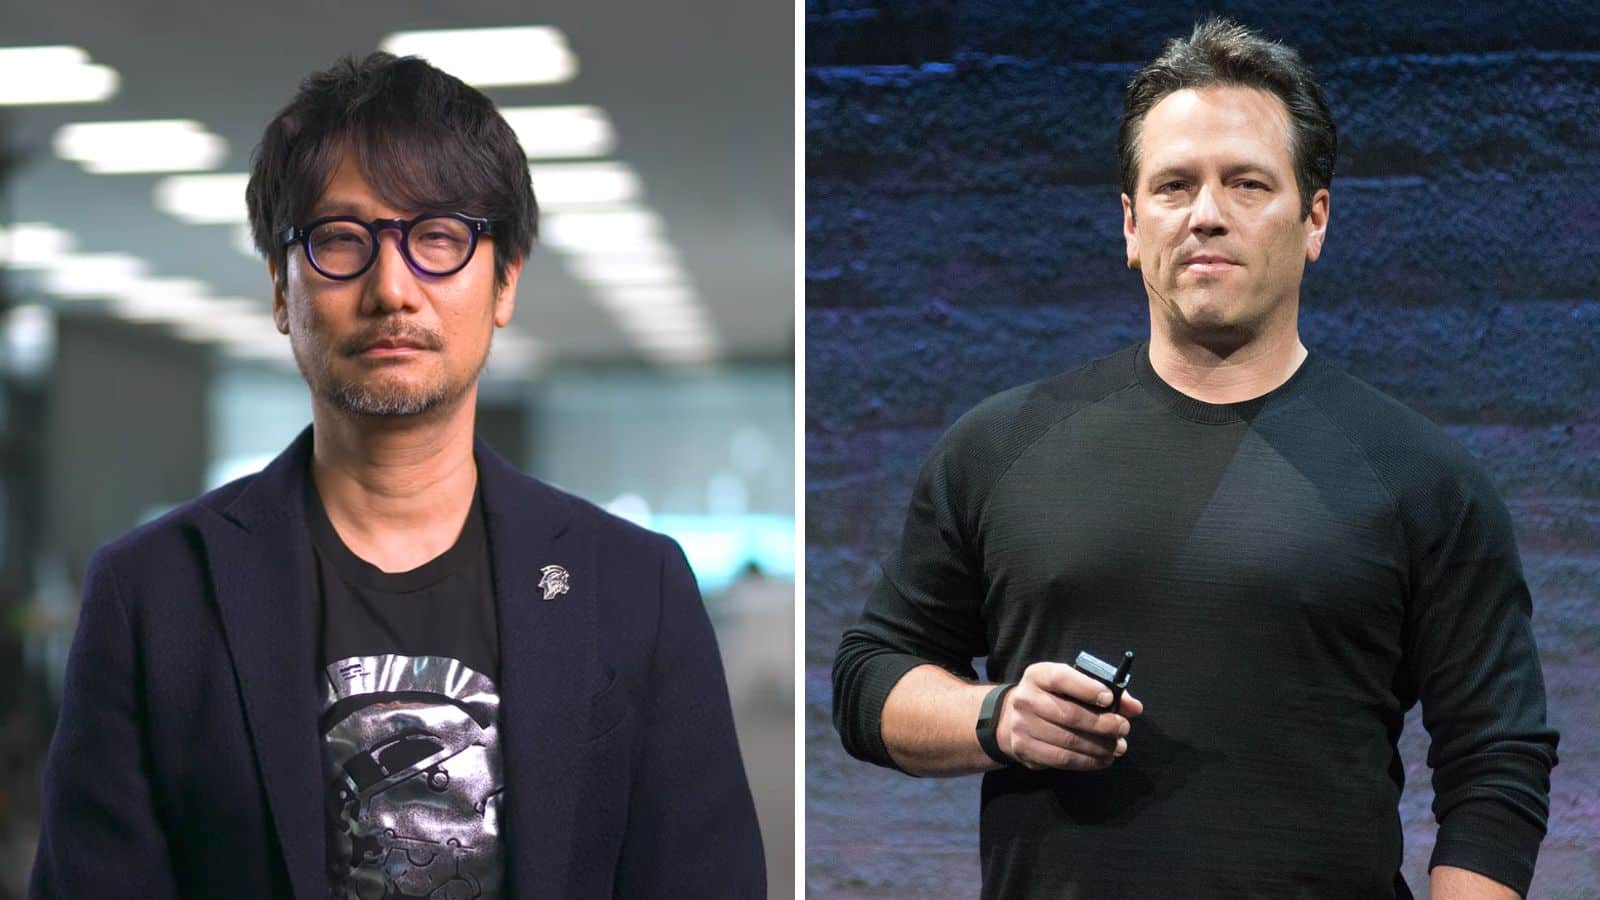 Hideo Kojima Responds to the Rumors of His Involvement With Blue